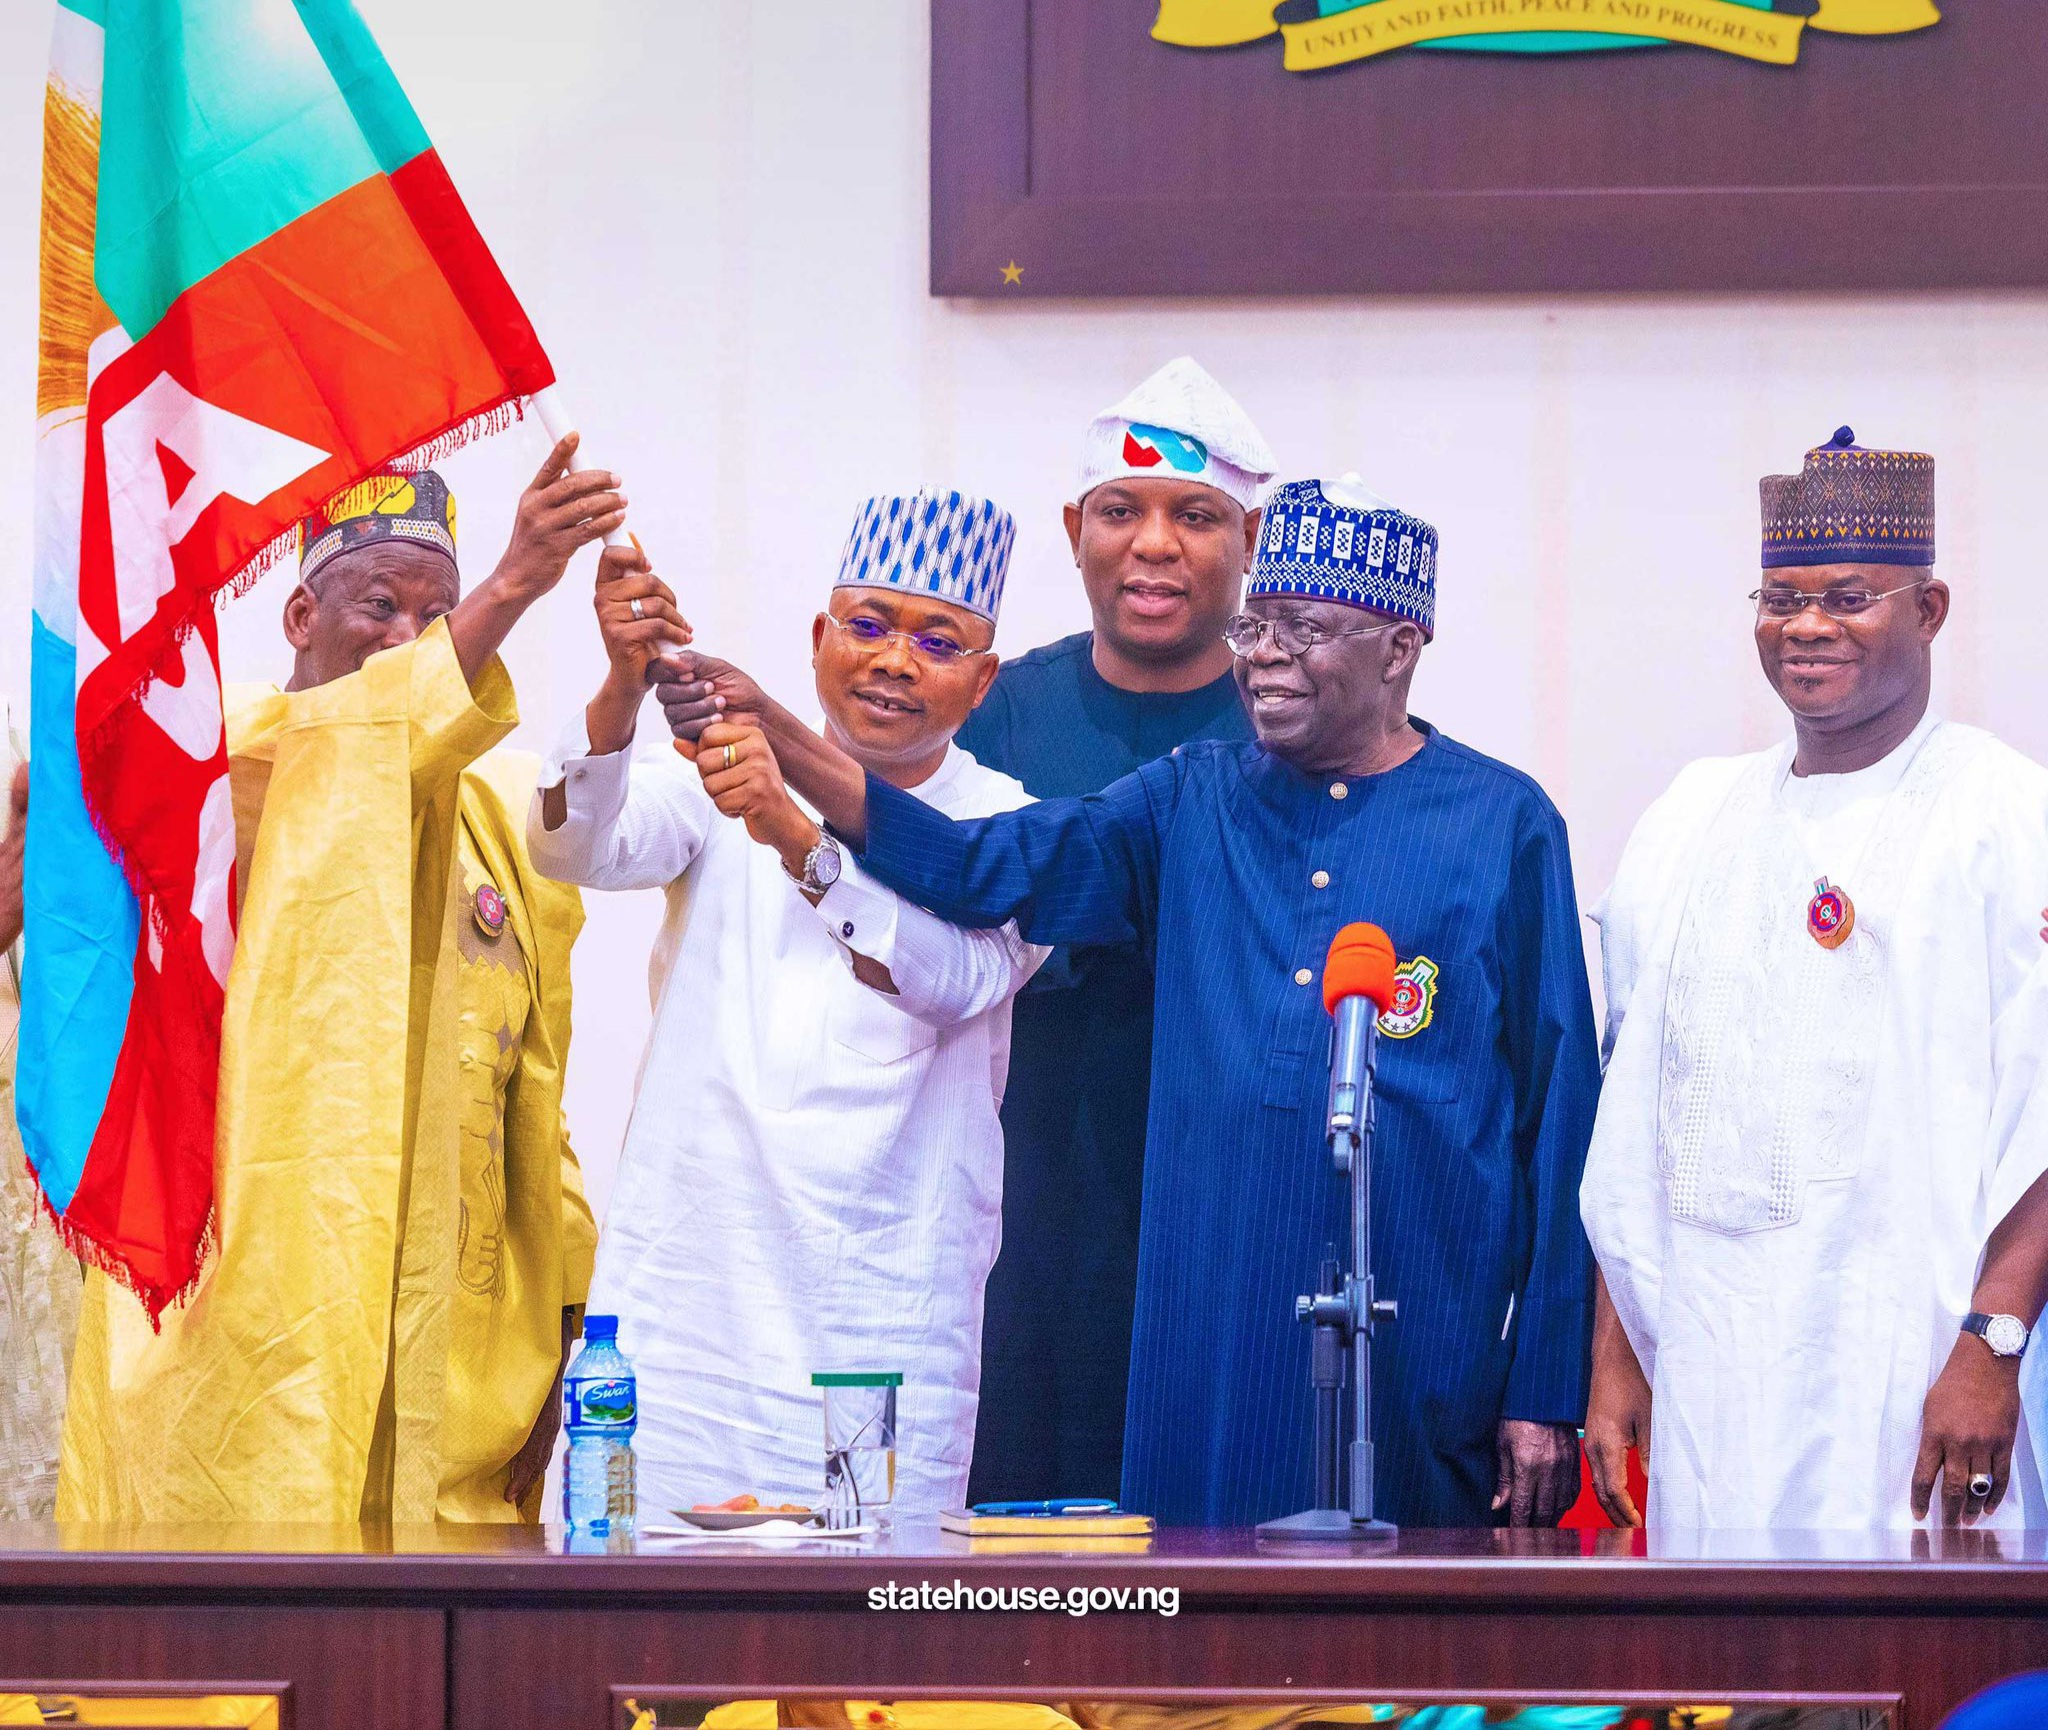 President Bola Tinubu hands the APC flag to the party's governorship candidate in Kogi State, Alhaji Ahmed Usman Ododo in company of current Kogi Governor, Yahaya Bello